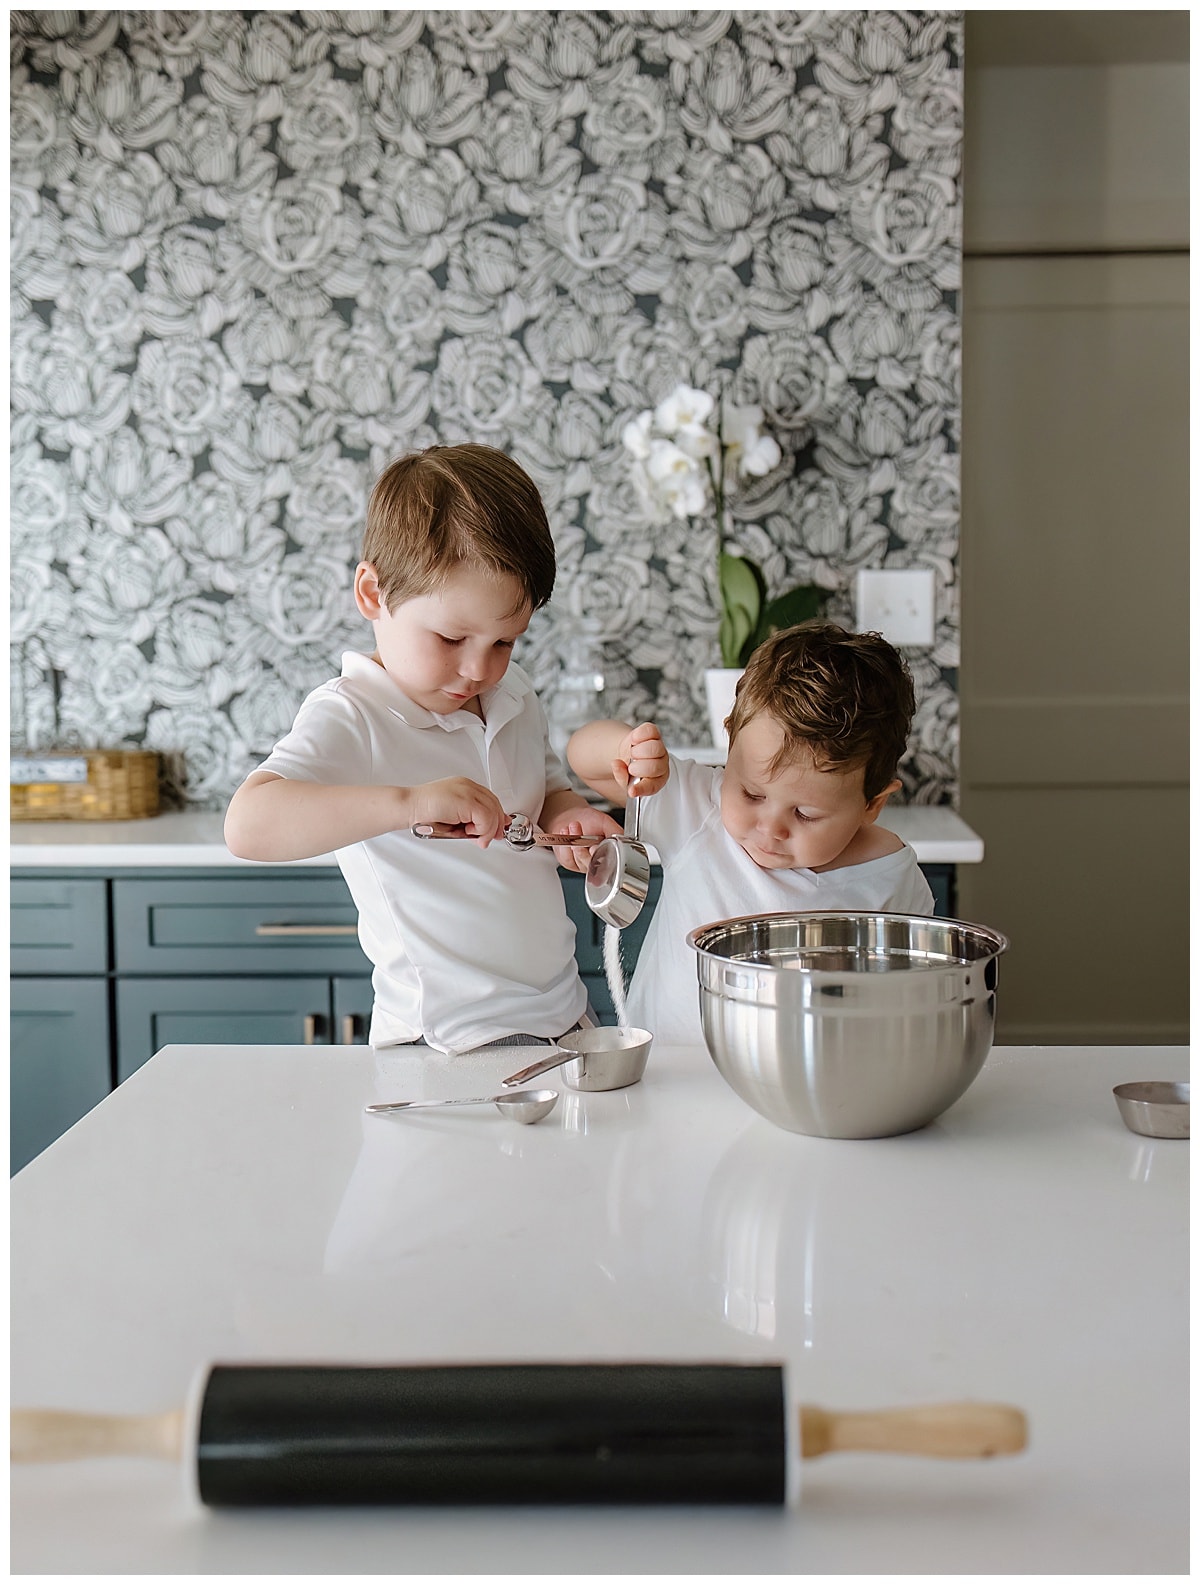 Little boys bake together during their Mom's in home maternity session